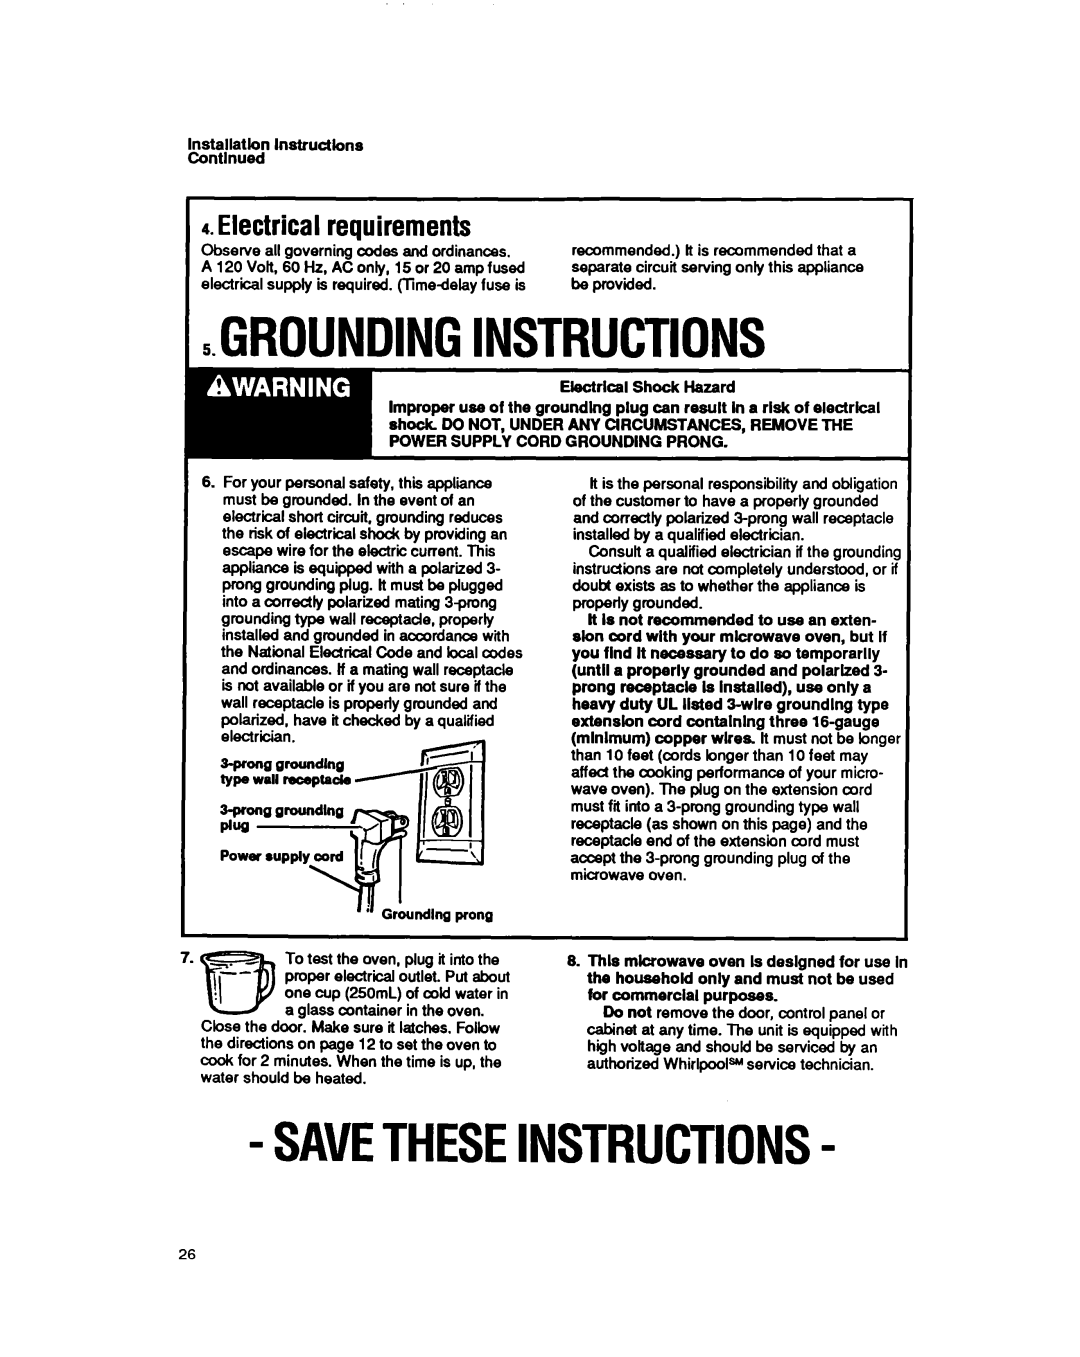 Whirlpool MS3080XY user manual S-Groundinginstructions, Savetheseinstructions, Electricalrequirements 